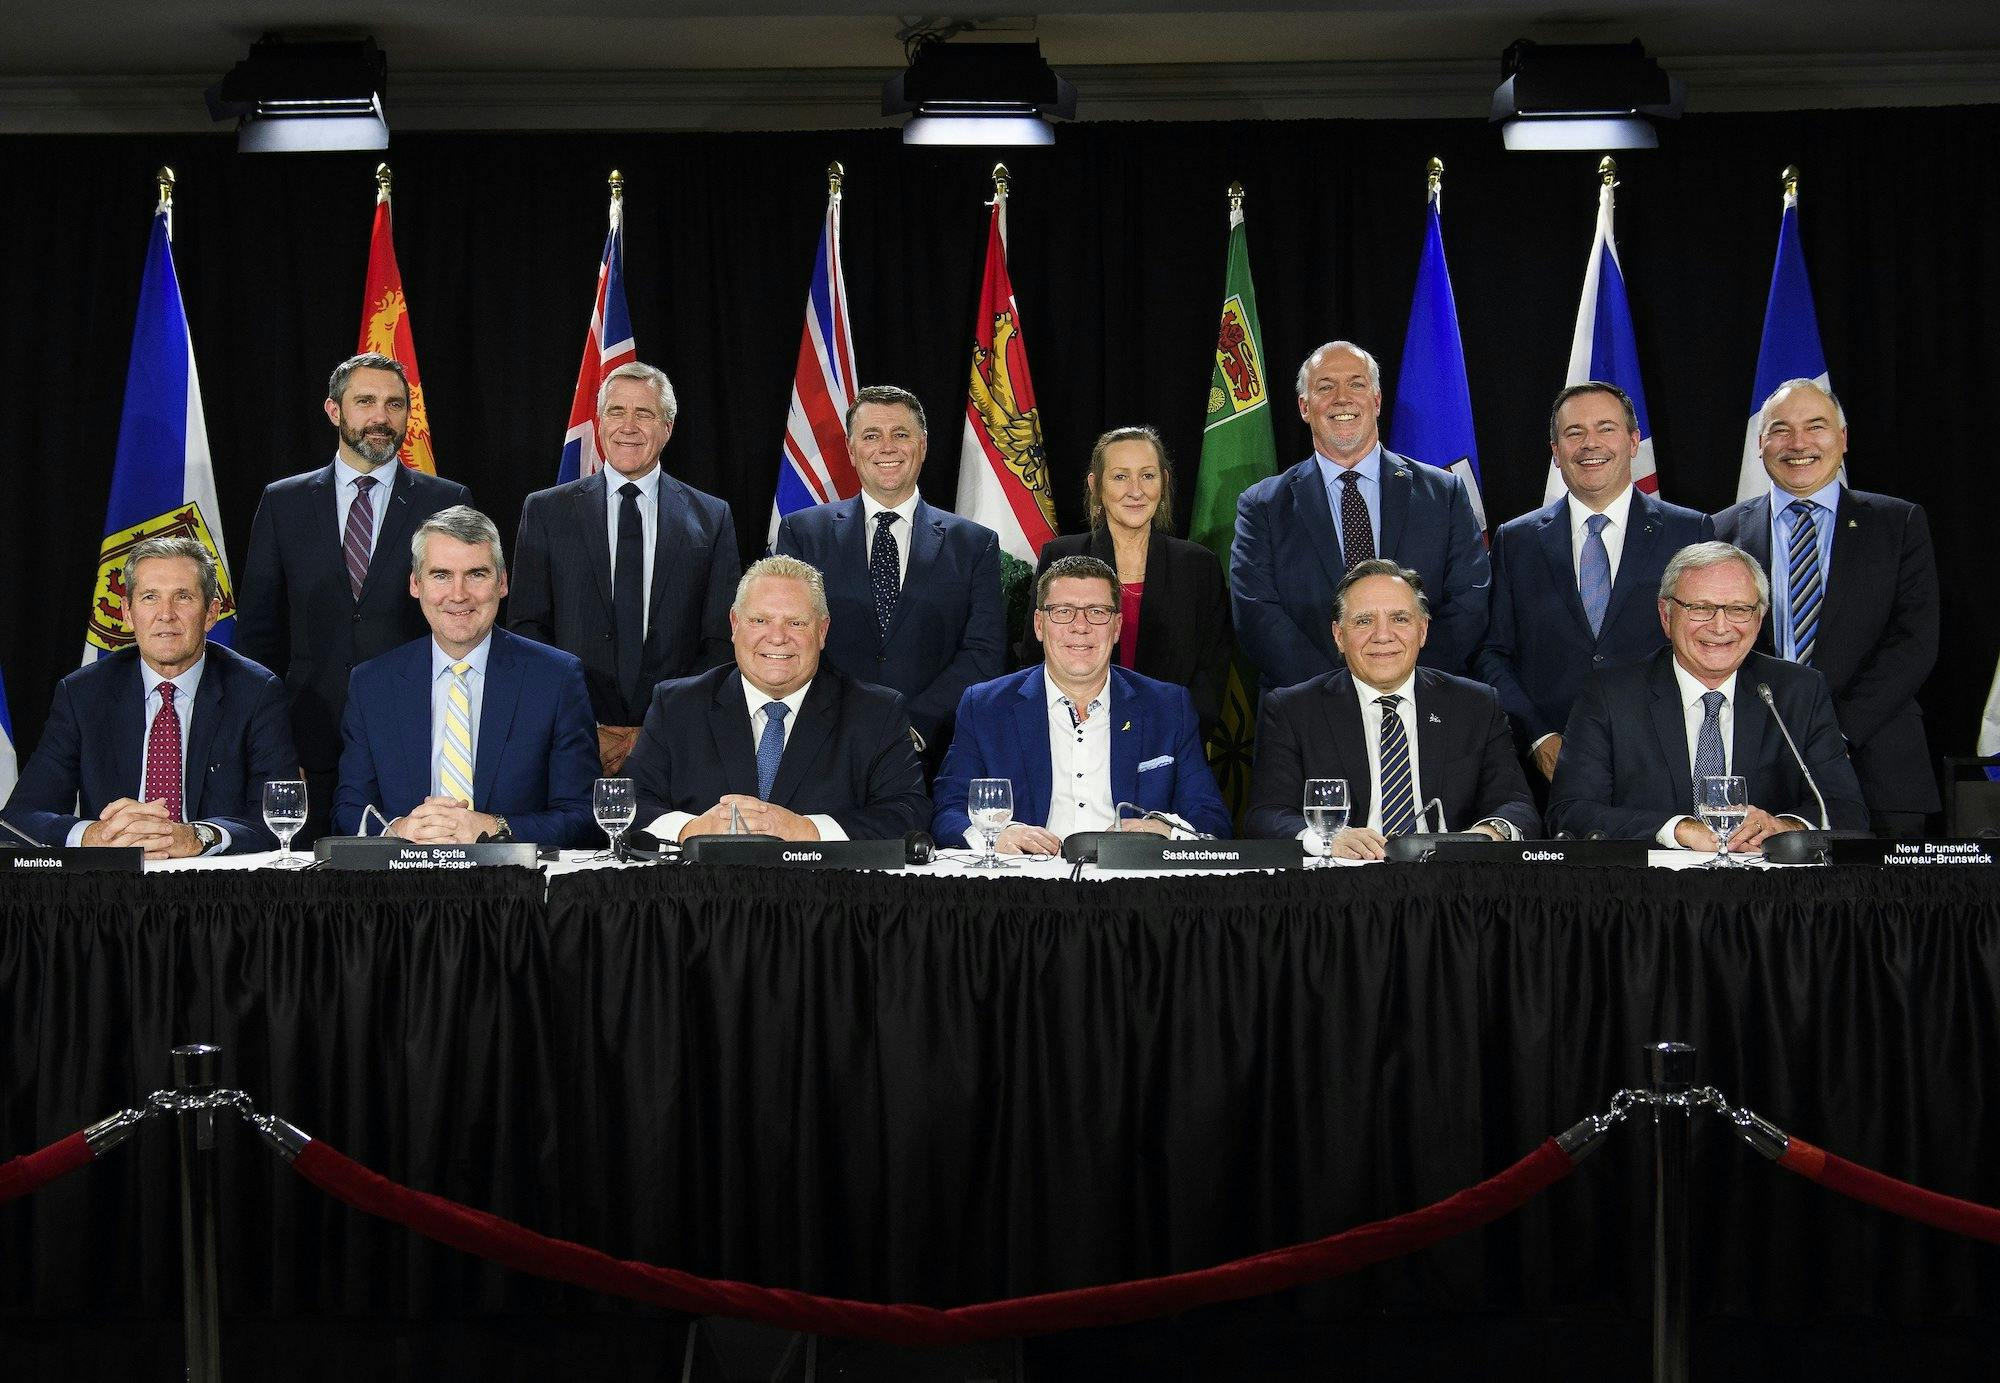 Premiers chat before Council of the Federation meeting next month